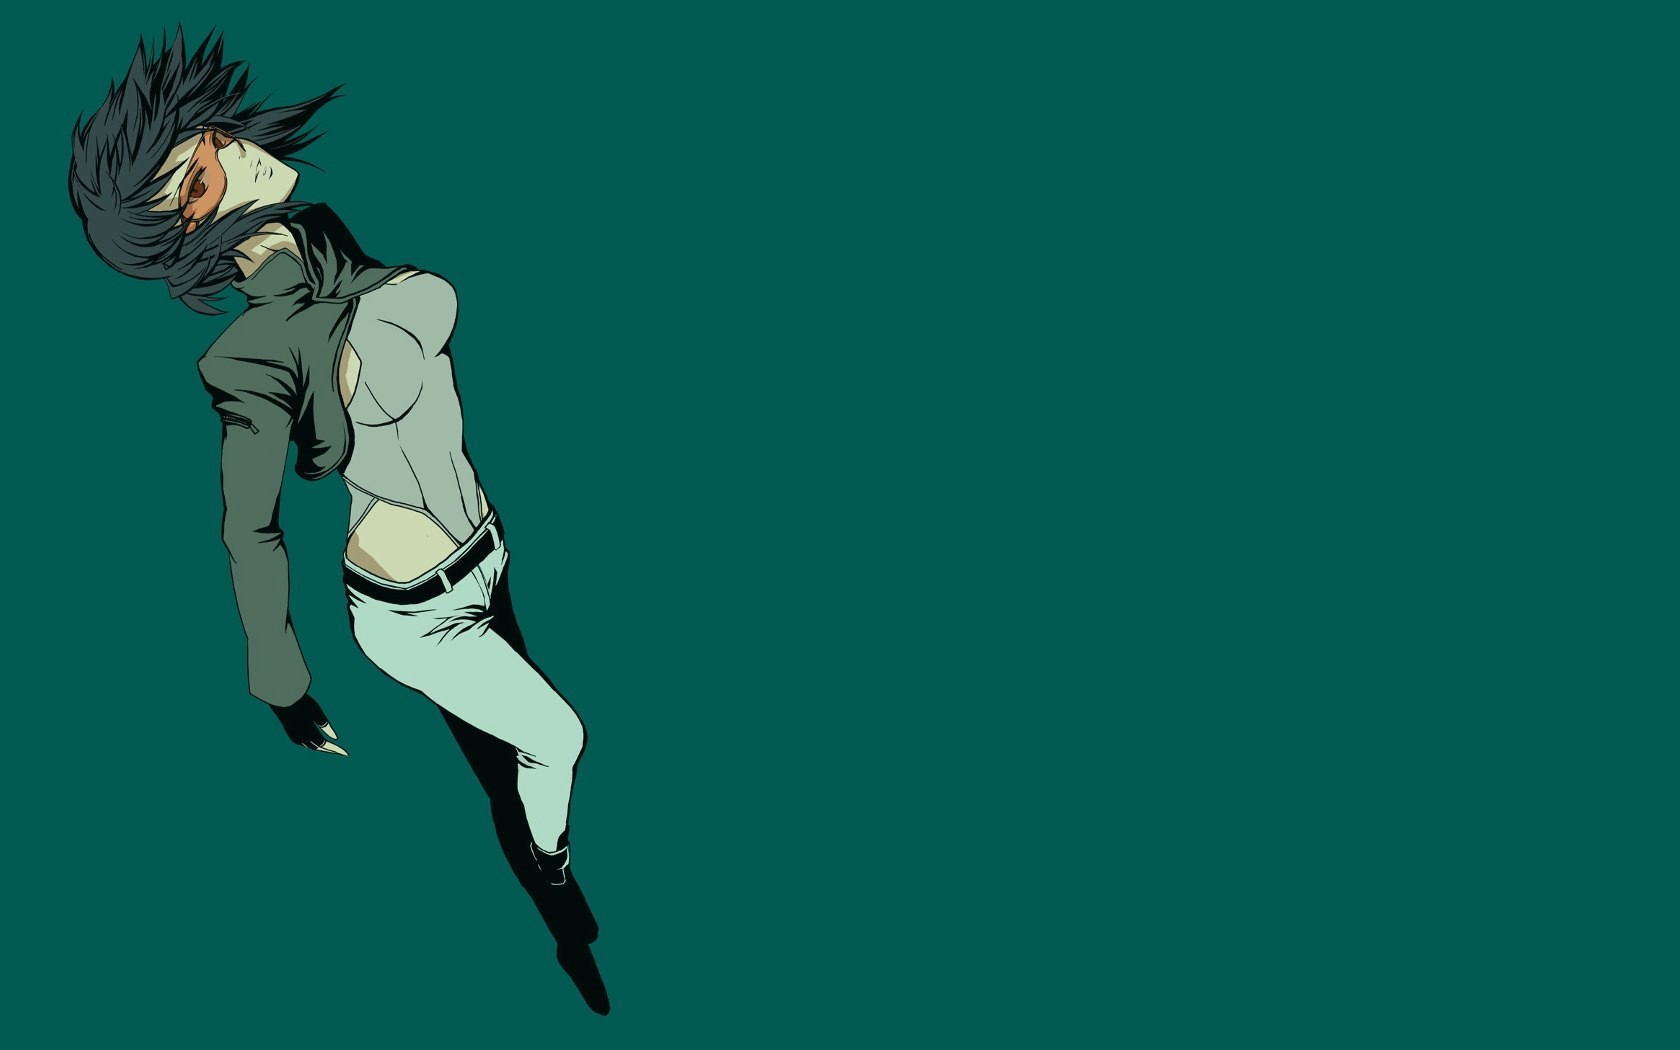 ghost in the shell wallpaper hd,green,cartoon,anime,fictional character,animation